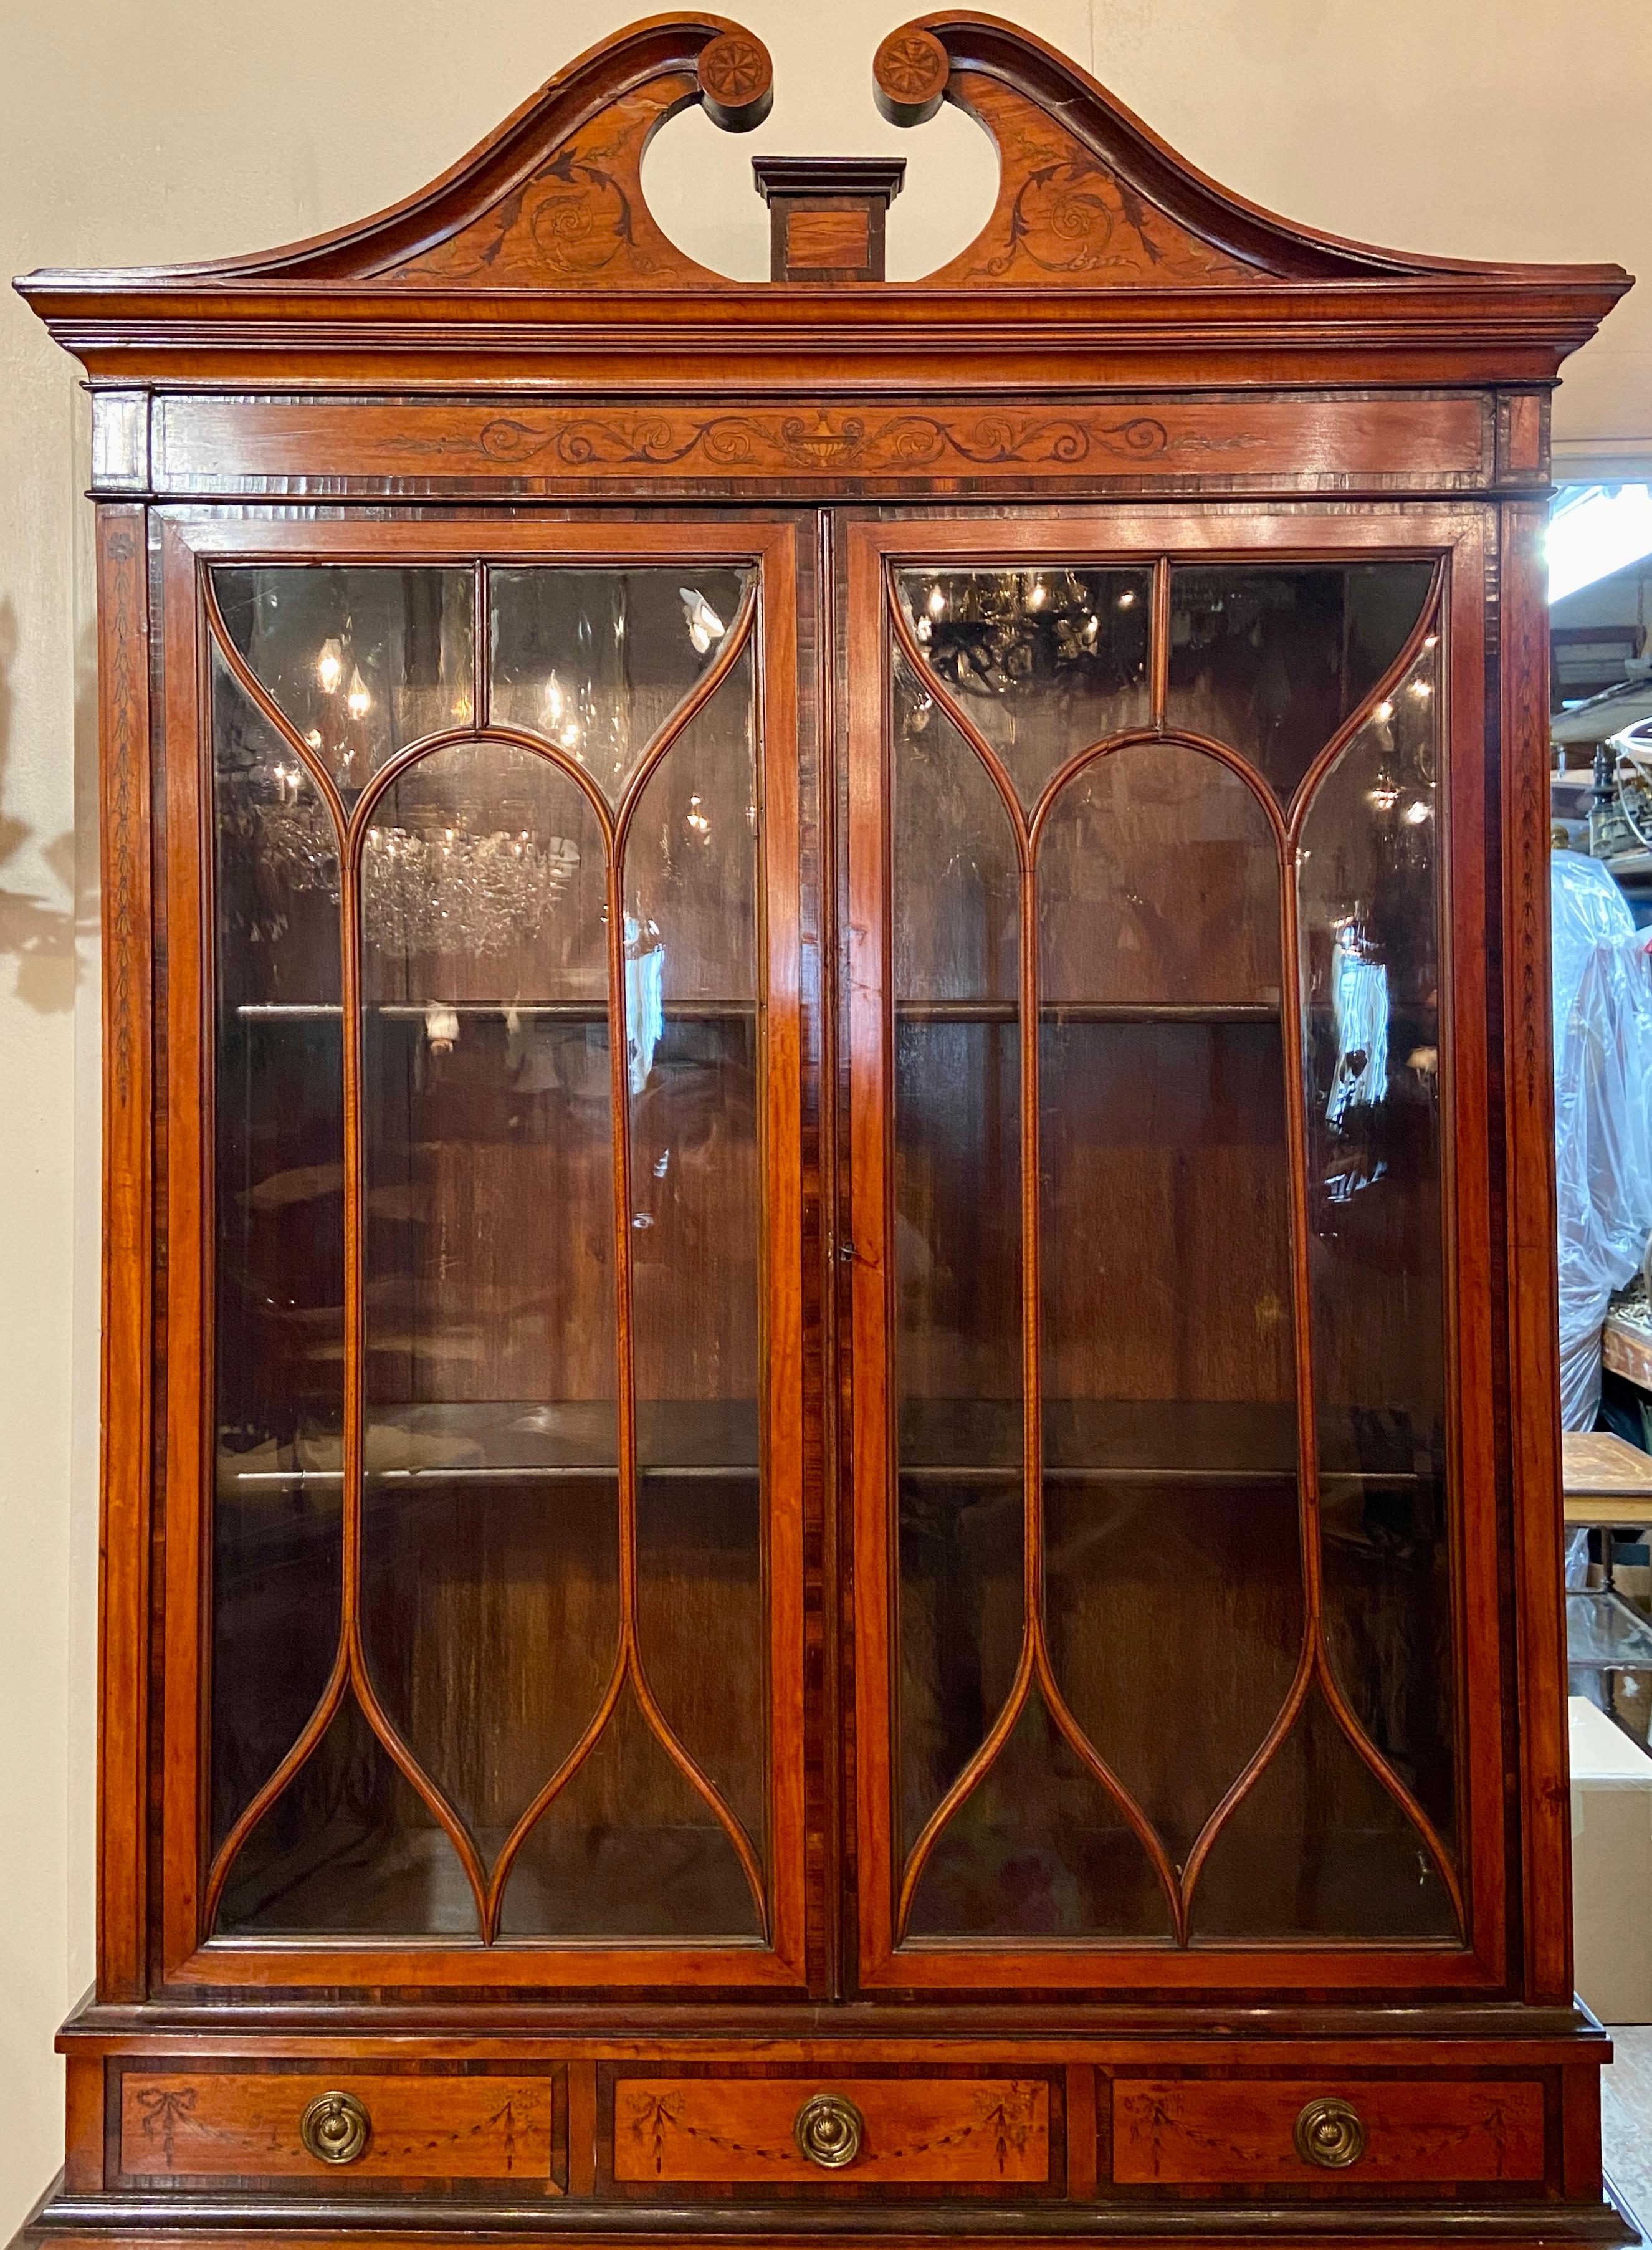 Antique English Sheraton Satinwood Inlaid Secretary with Rosewood Banding, Circa 1880.
This is a very lovely secretary, typical of the period and with fine detail. The warm color of the satinwood and rosewood is pleasing. It has ample storage and